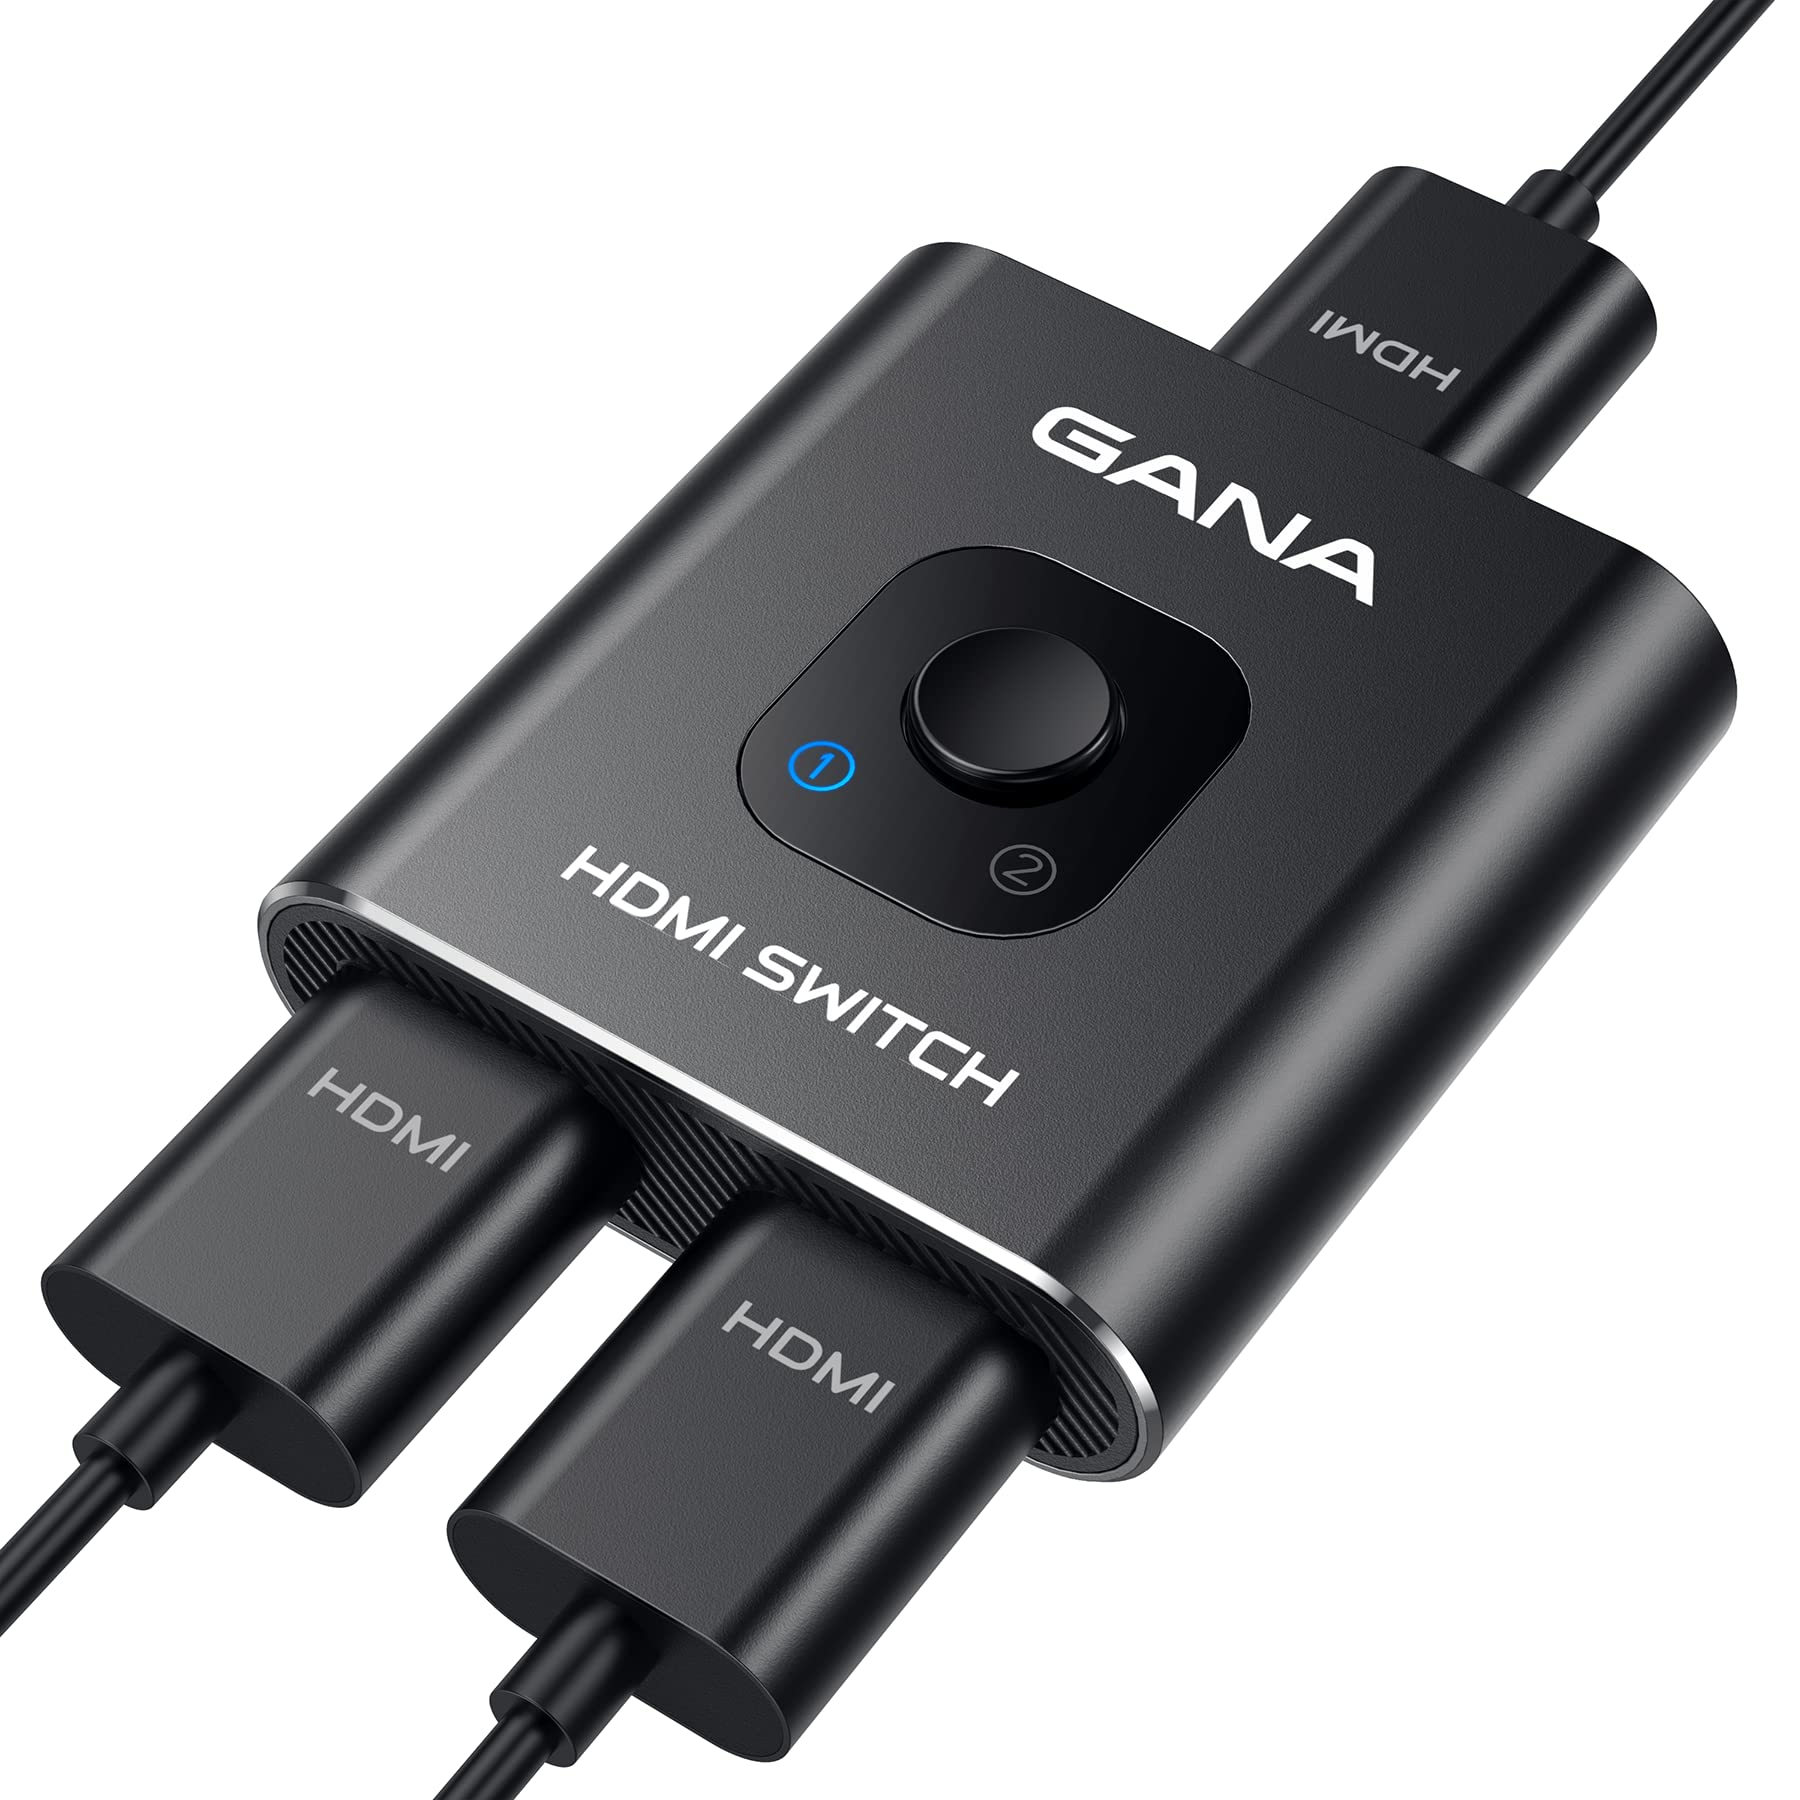 HDMI Switch 4k@60hz Splitter, GANA Aluminum Bidirectional HDMI Switcher 2 in 1 Out, Manual HDMI Hub Supports HD Compatible with Xbox PS5/4/3 Blu-Ray Player Fire Stick Roku (1 Display at a Time)